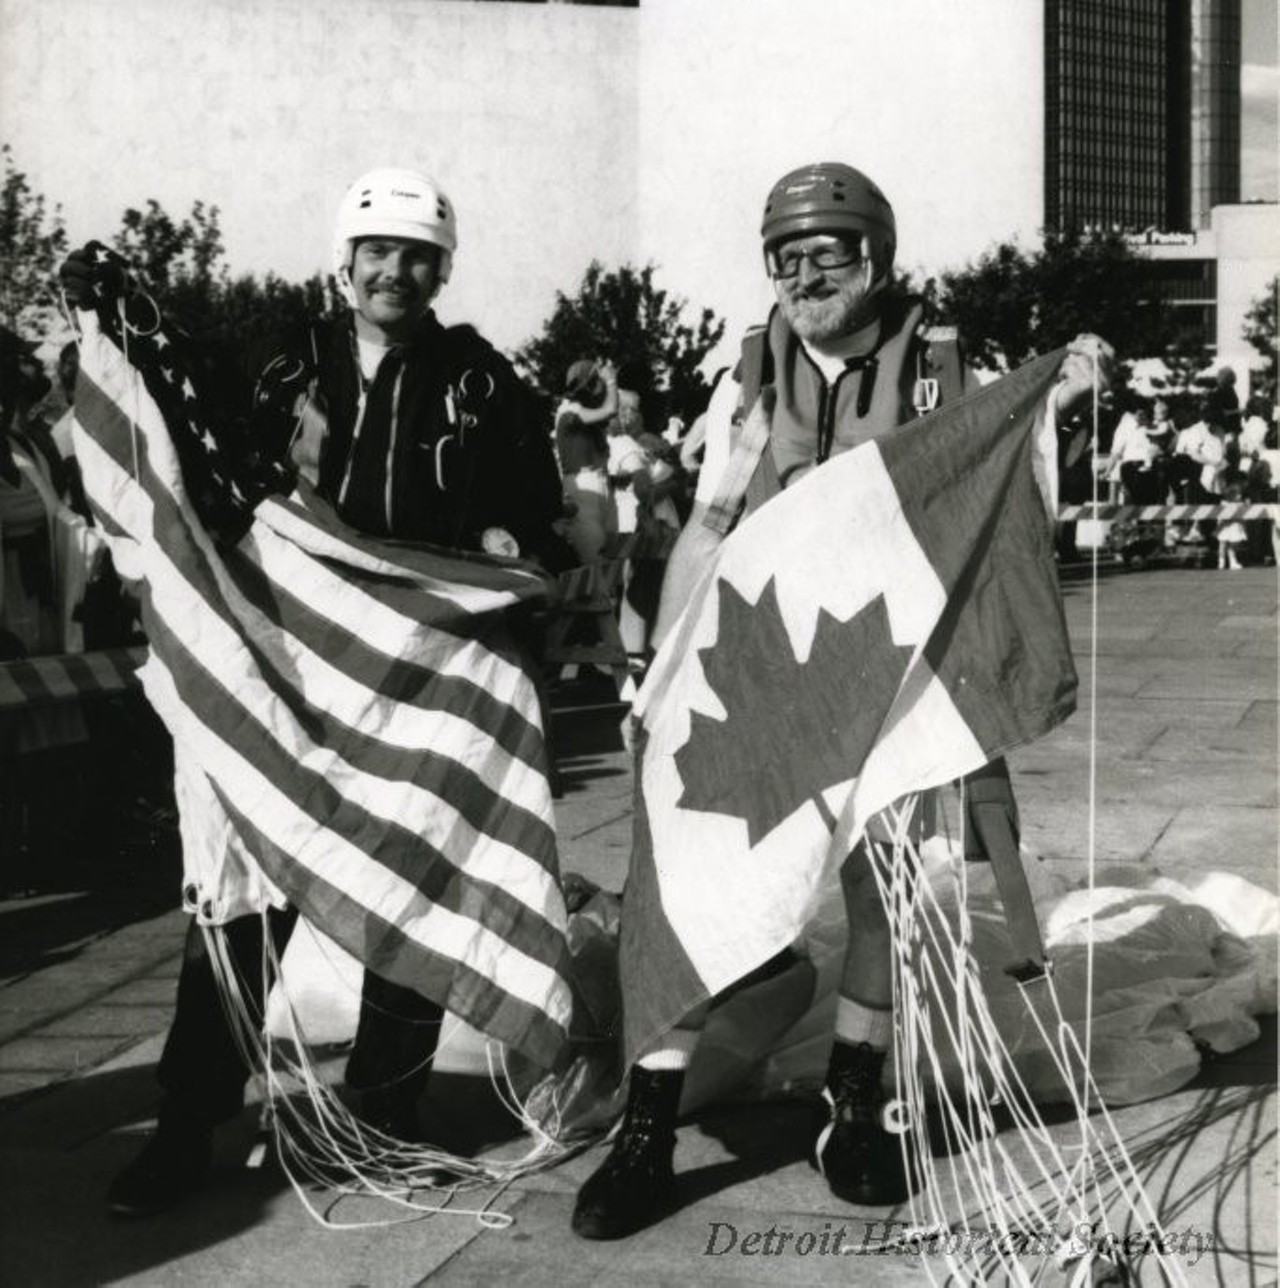 "Black and white photographic print depicting two men standing in Hart Plaza holding an American and Canadian flag, wearing helmets and parachutes. In the background are the Renaissance Center, Ford Auditorium and many people.
Caption reads: Skydivers carrying American and Canadian flags are symbolic of the 24 year-old Detroit/Windsor International Freedom Festival. Their free fall and landing on Hart Plaza is part of the International Air and Water Show on June 25 and June 26. The Freedom Festival is a ten day celebration of friendship and freedom between the United States and Canada. It features more than 50 events and runs from Friday, June 25 through Sunday, July 4.
Contact: Sharlan Douglas"